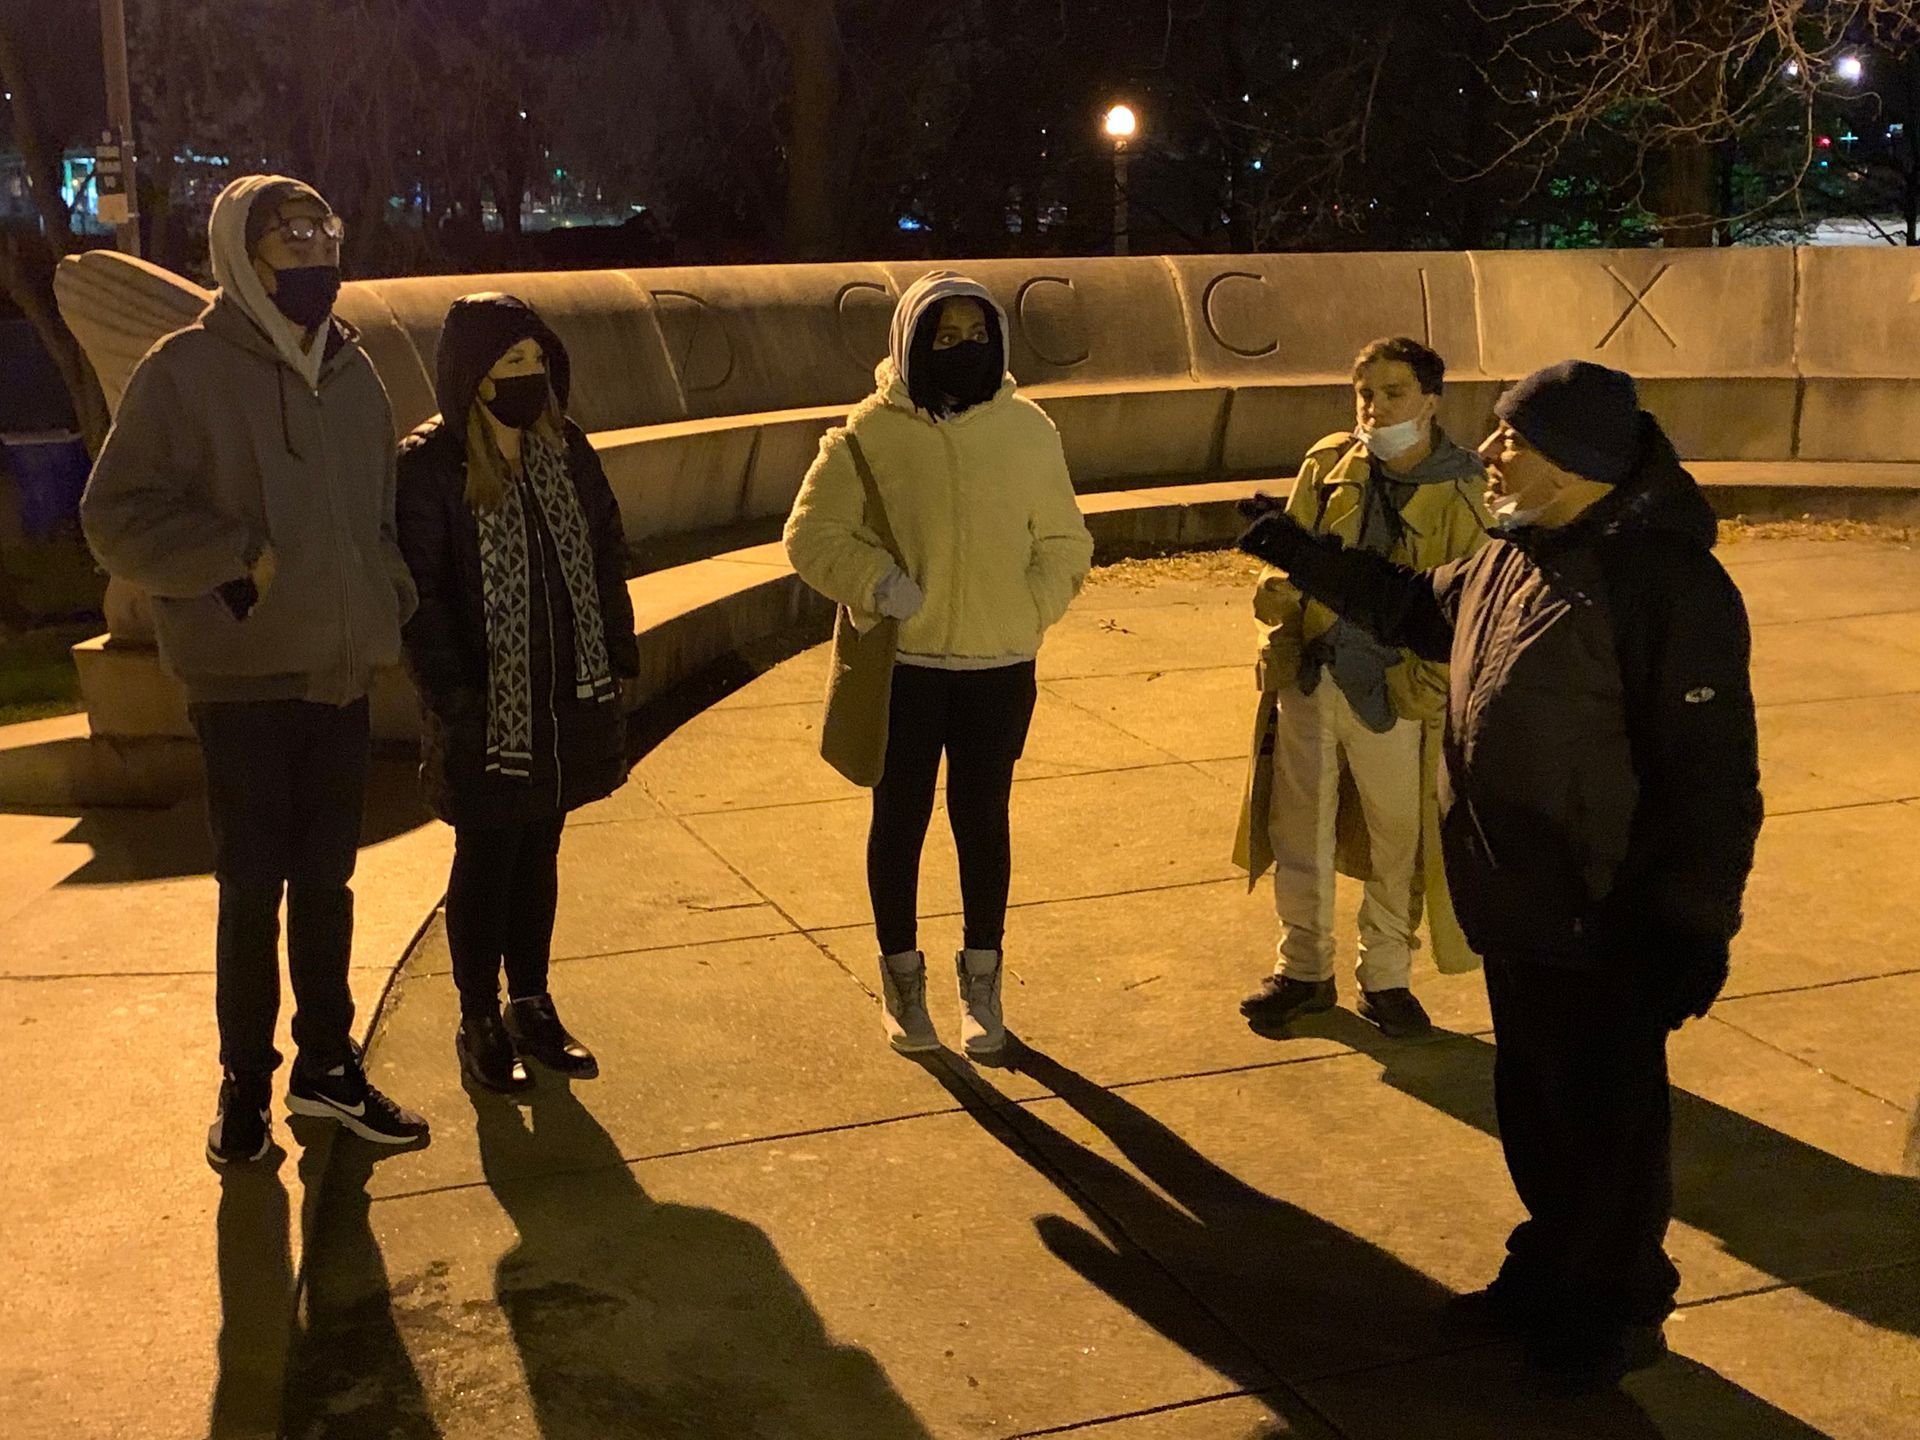 Chicago Ghost Tour Telling Haunted Stories at Lincoln Park in Chicago